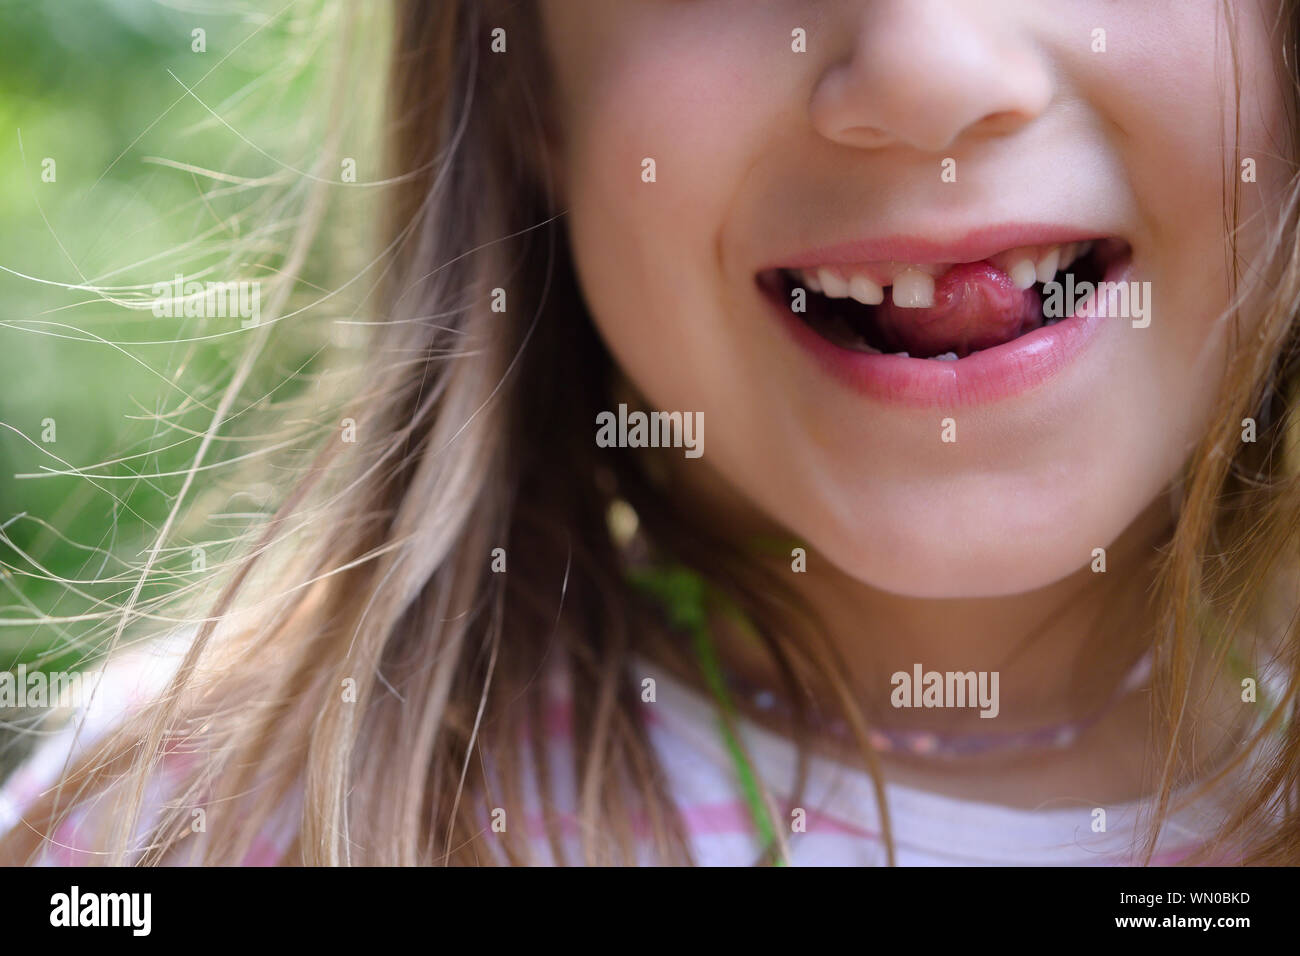 Girl with missing tooth Stock Photo